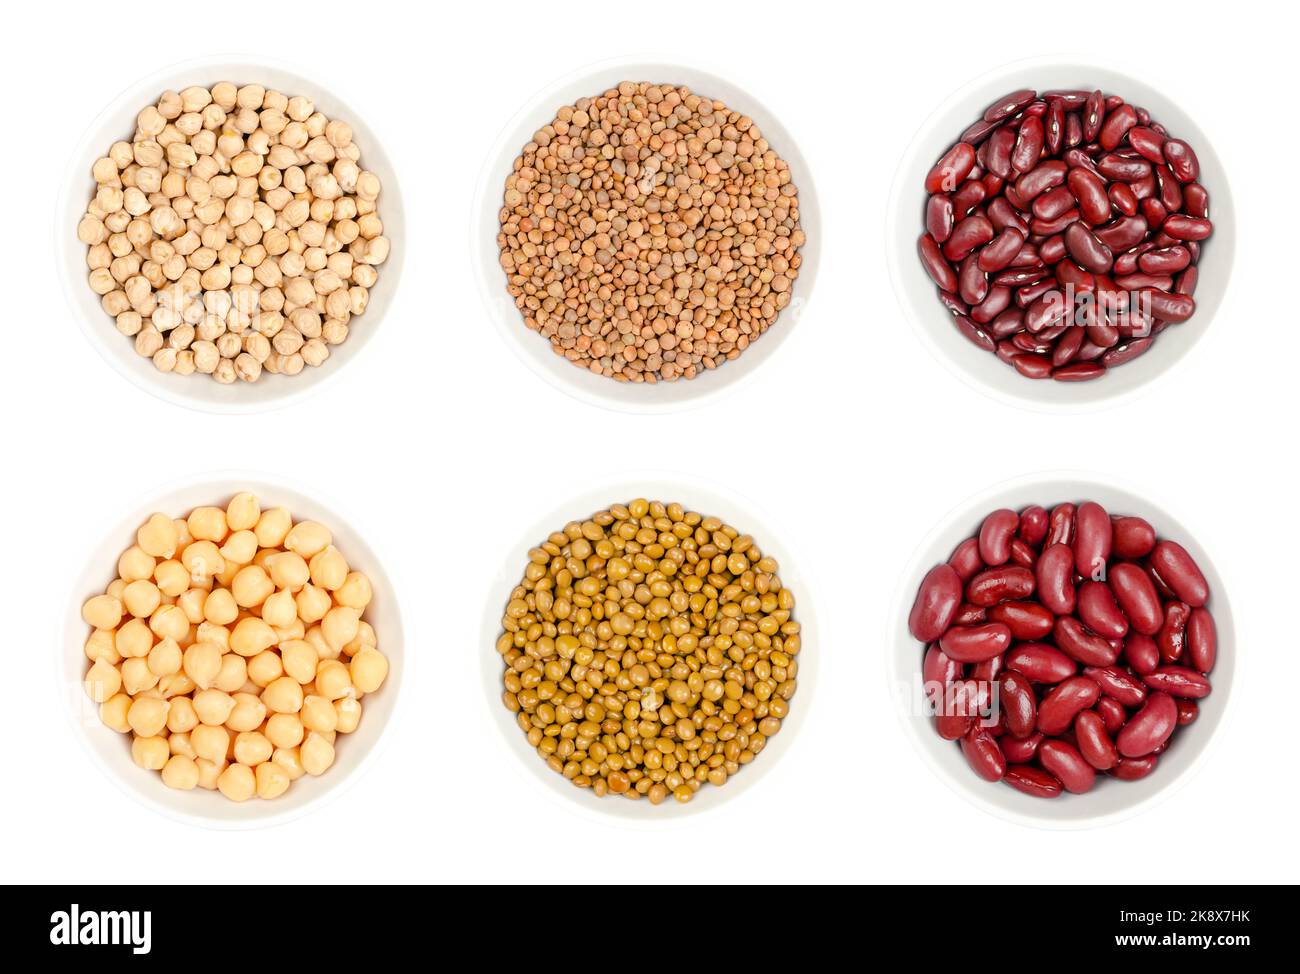 Dried and canned chickpeas, brown lentils and red kidney beans, in white bowls, isolated from above on white background. Raw and cooked seeds. Stock Photo